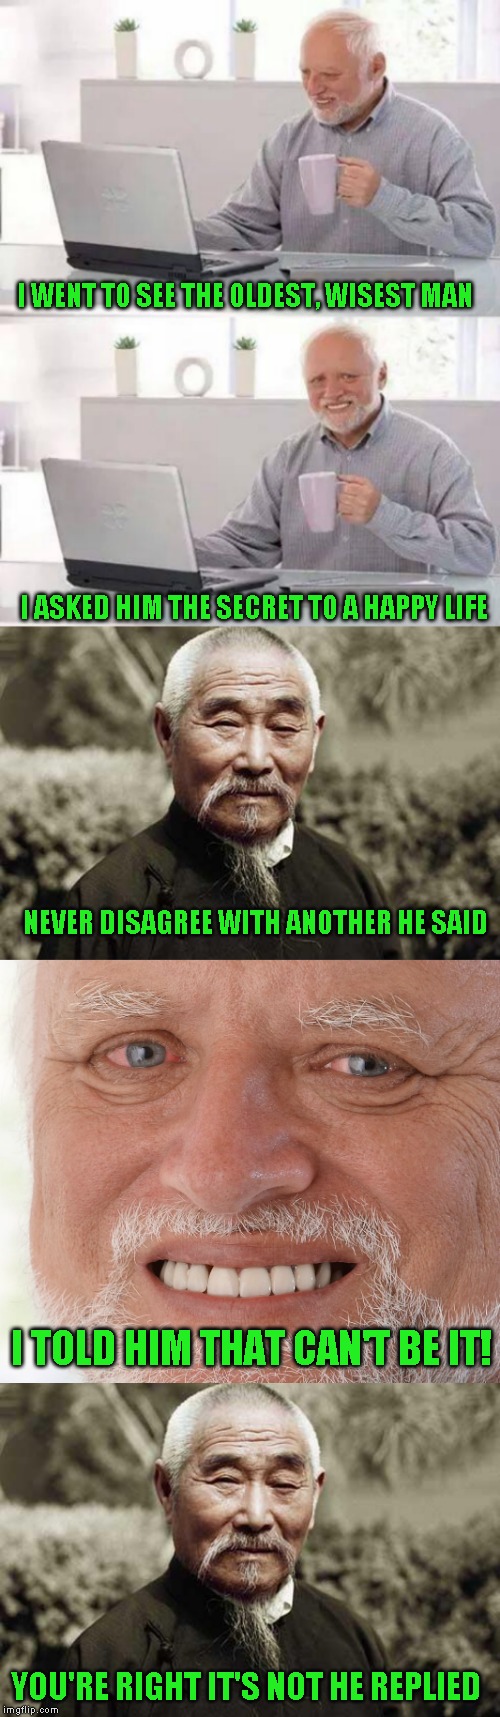 One of my favorite old jokes | I WENT TO SEE THE OLDEST, WISEST MAN; I ASKED HIM THE SECRET TO A HAPPY LIFE; NEVER DISAGREE WITH ANOTHER HE SAID; I TOLD HIM THAT CAN'T BE IT! YOU'RE RIGHT IT'S NOT HE REPLIED | image tagged in wise man,memes,hide the pain harold | made w/ Imgflip meme maker